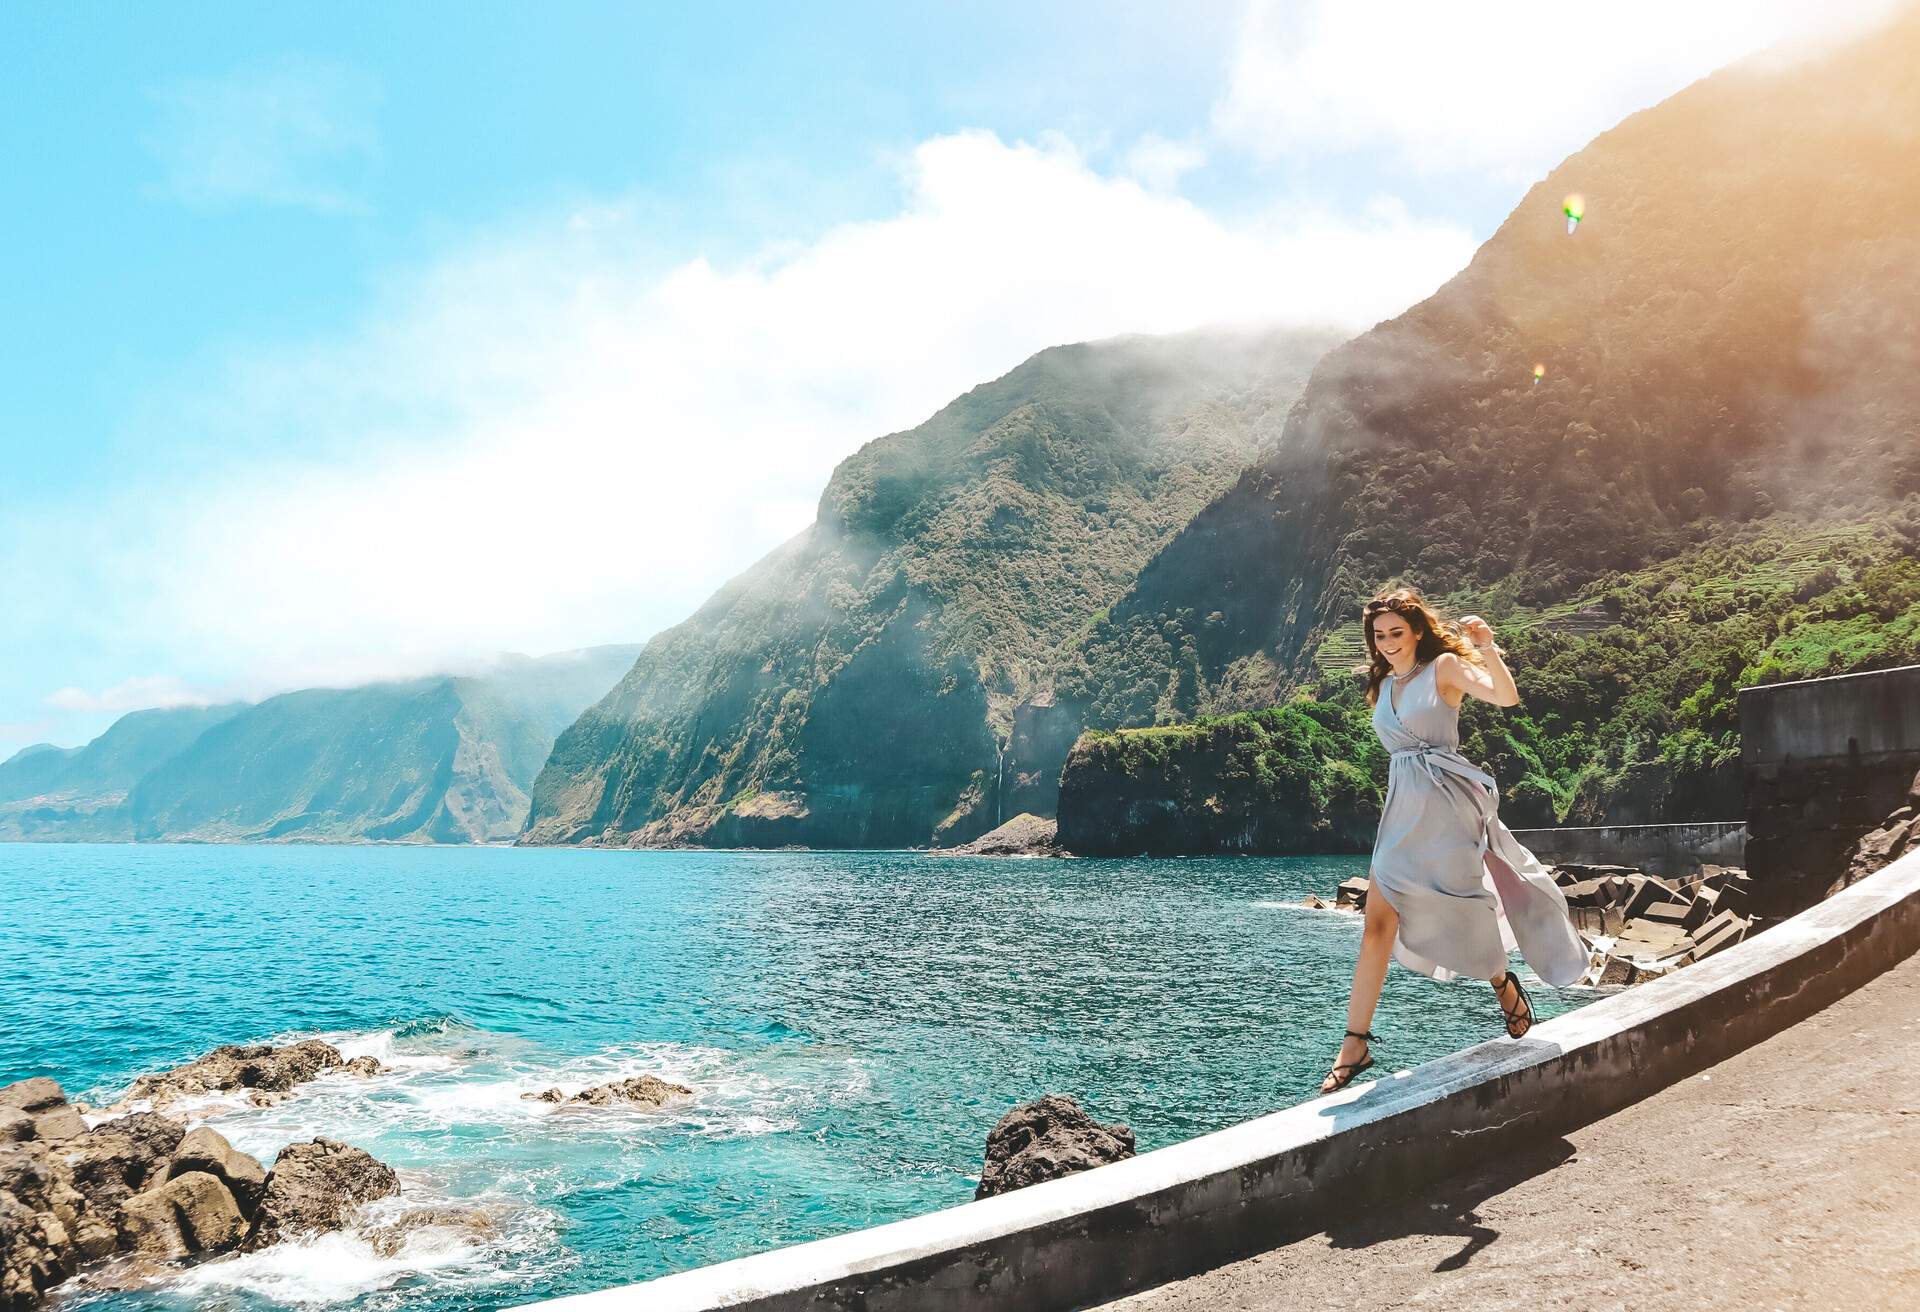 Womanon ledge by the sea with mountains in the background Portugal, Madeira Island.